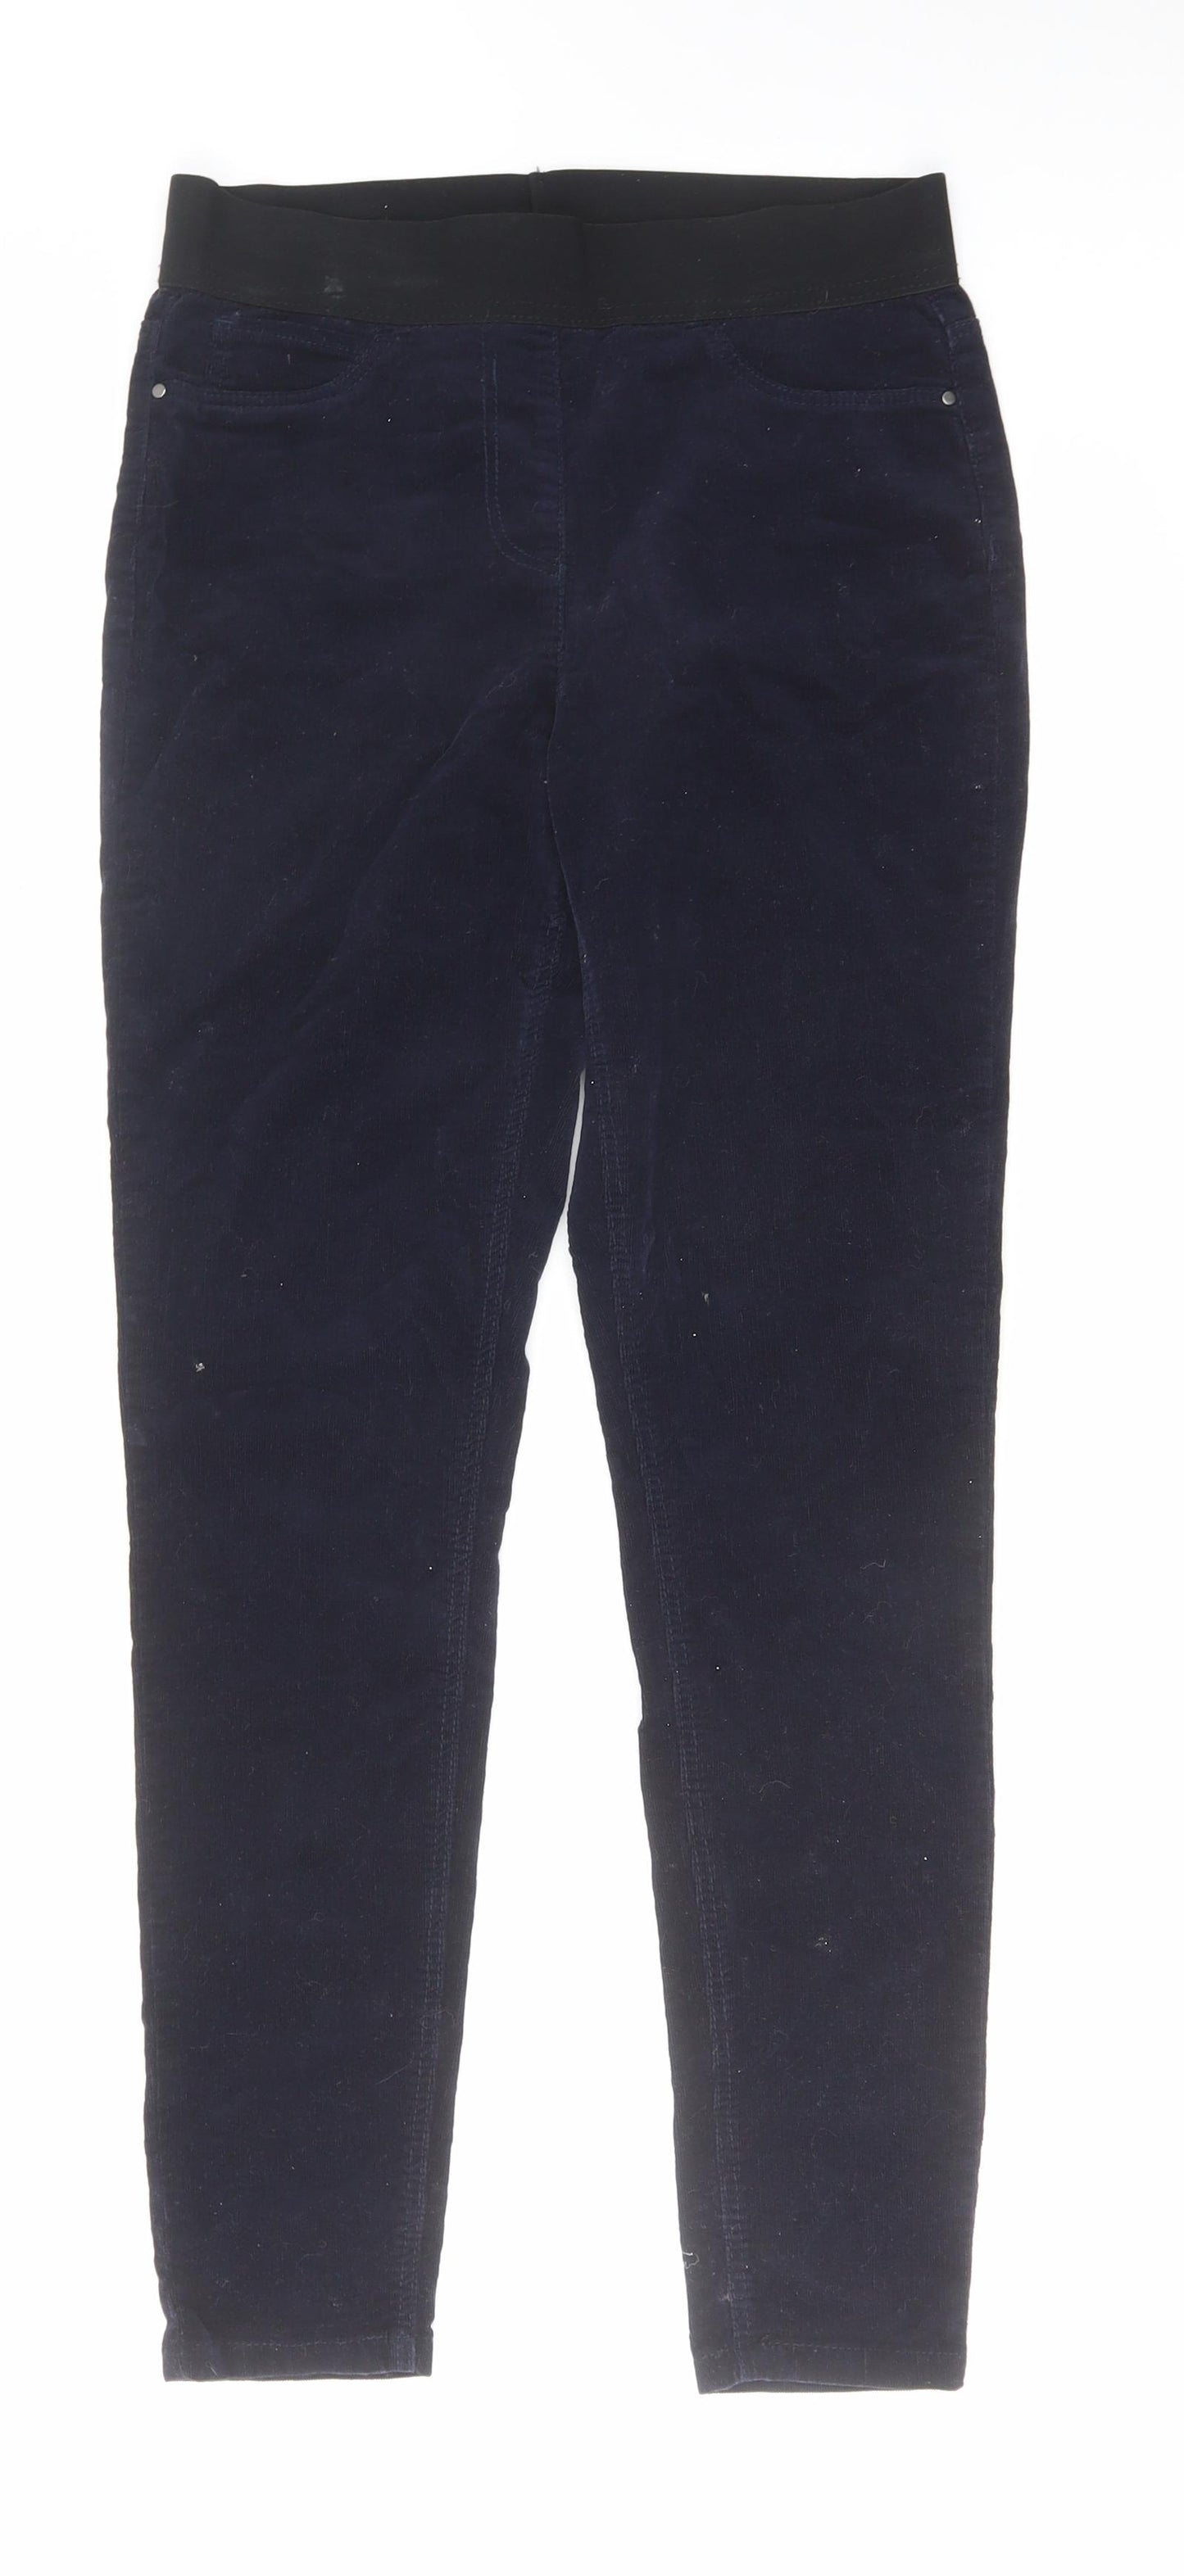 George Womens Blue Cotton Jegging Trousers Size 10 L28 in Regular